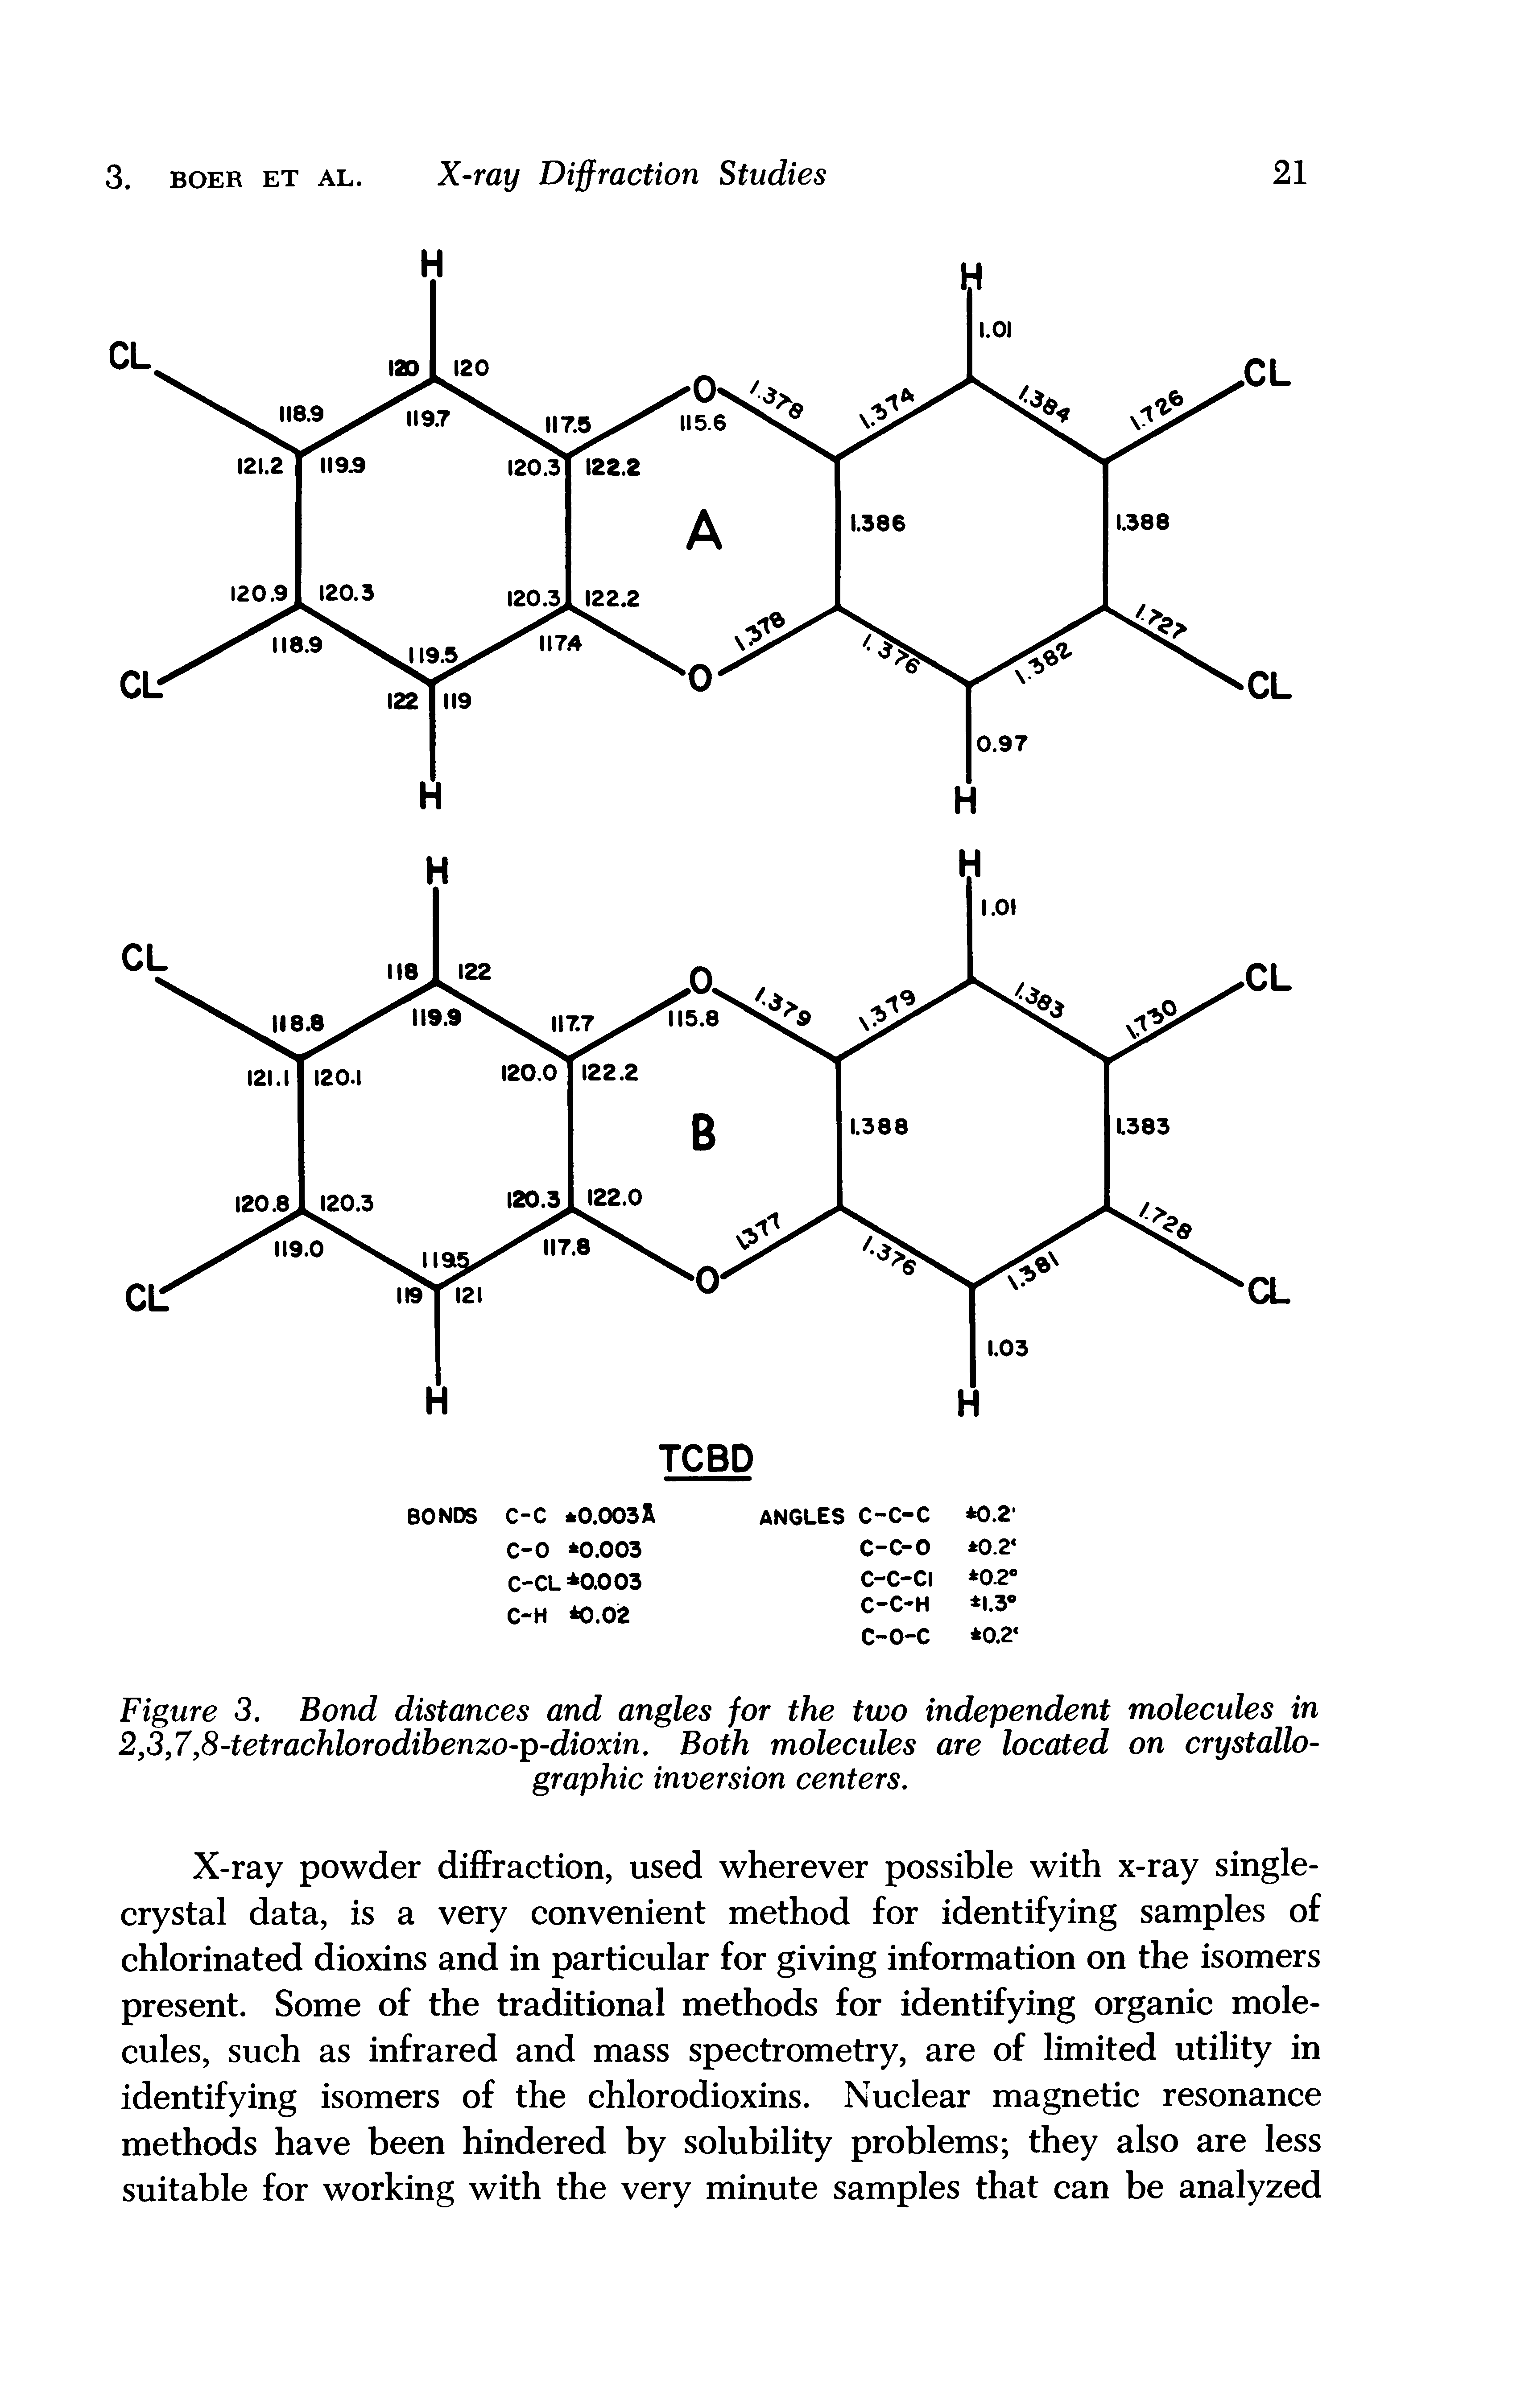 Figure 3. Bond distances and angles for the two independent molecules in 2,3,7,8-tetrachlorodihenzo-p-dioxin. Both molecules are located on crystallographic inversion centers.